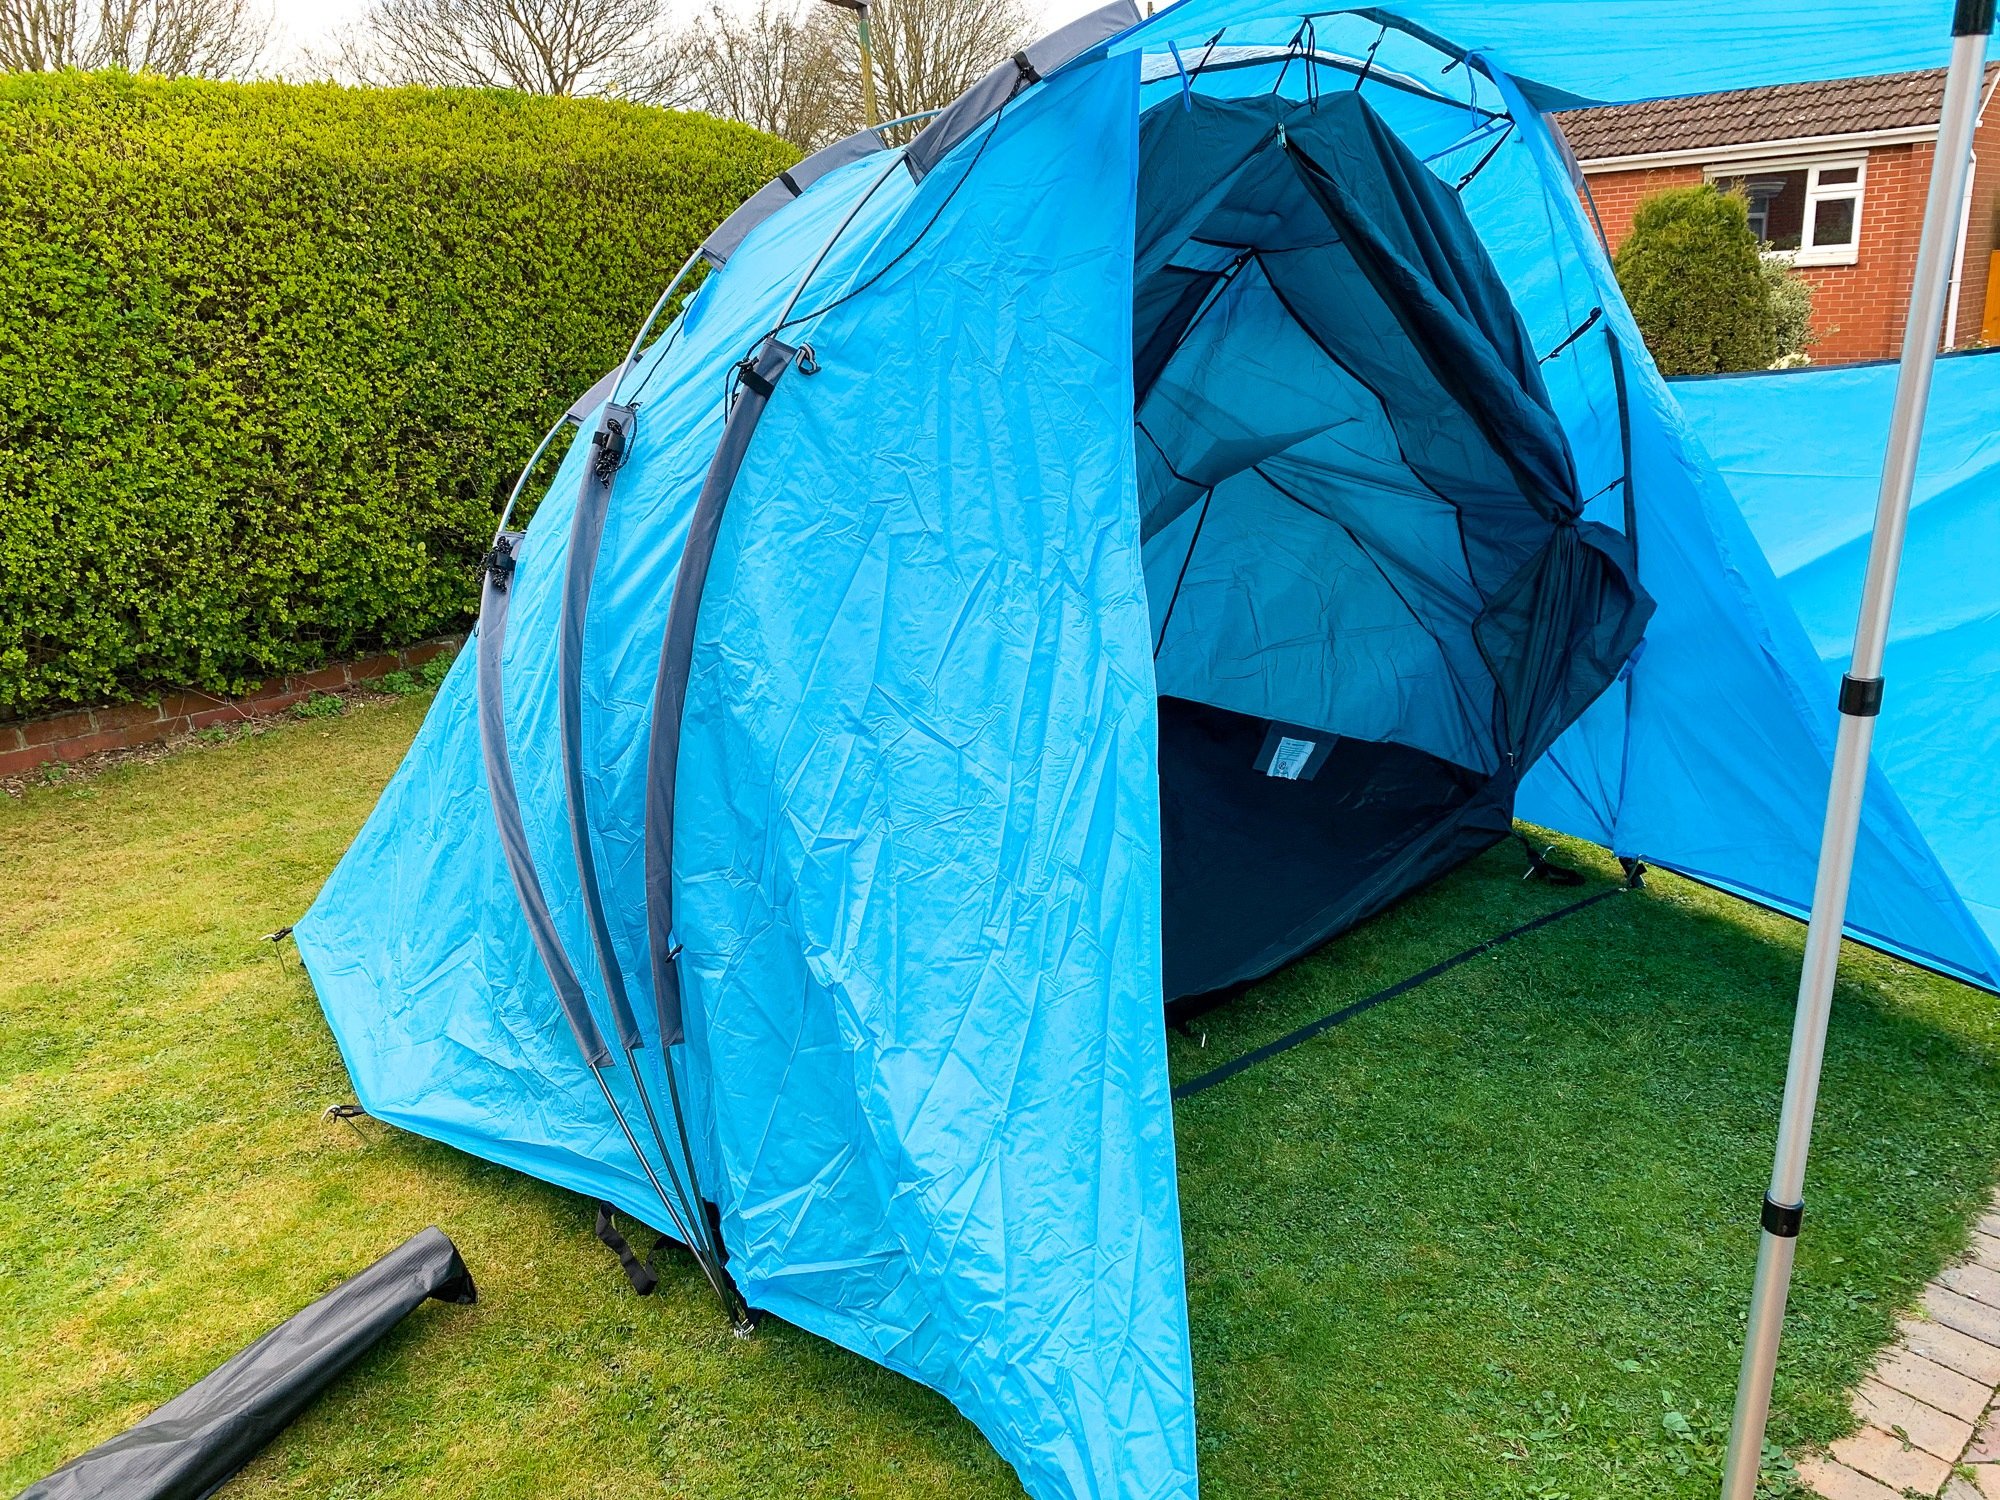 The SheltaPod set-up as a tent in our front garden